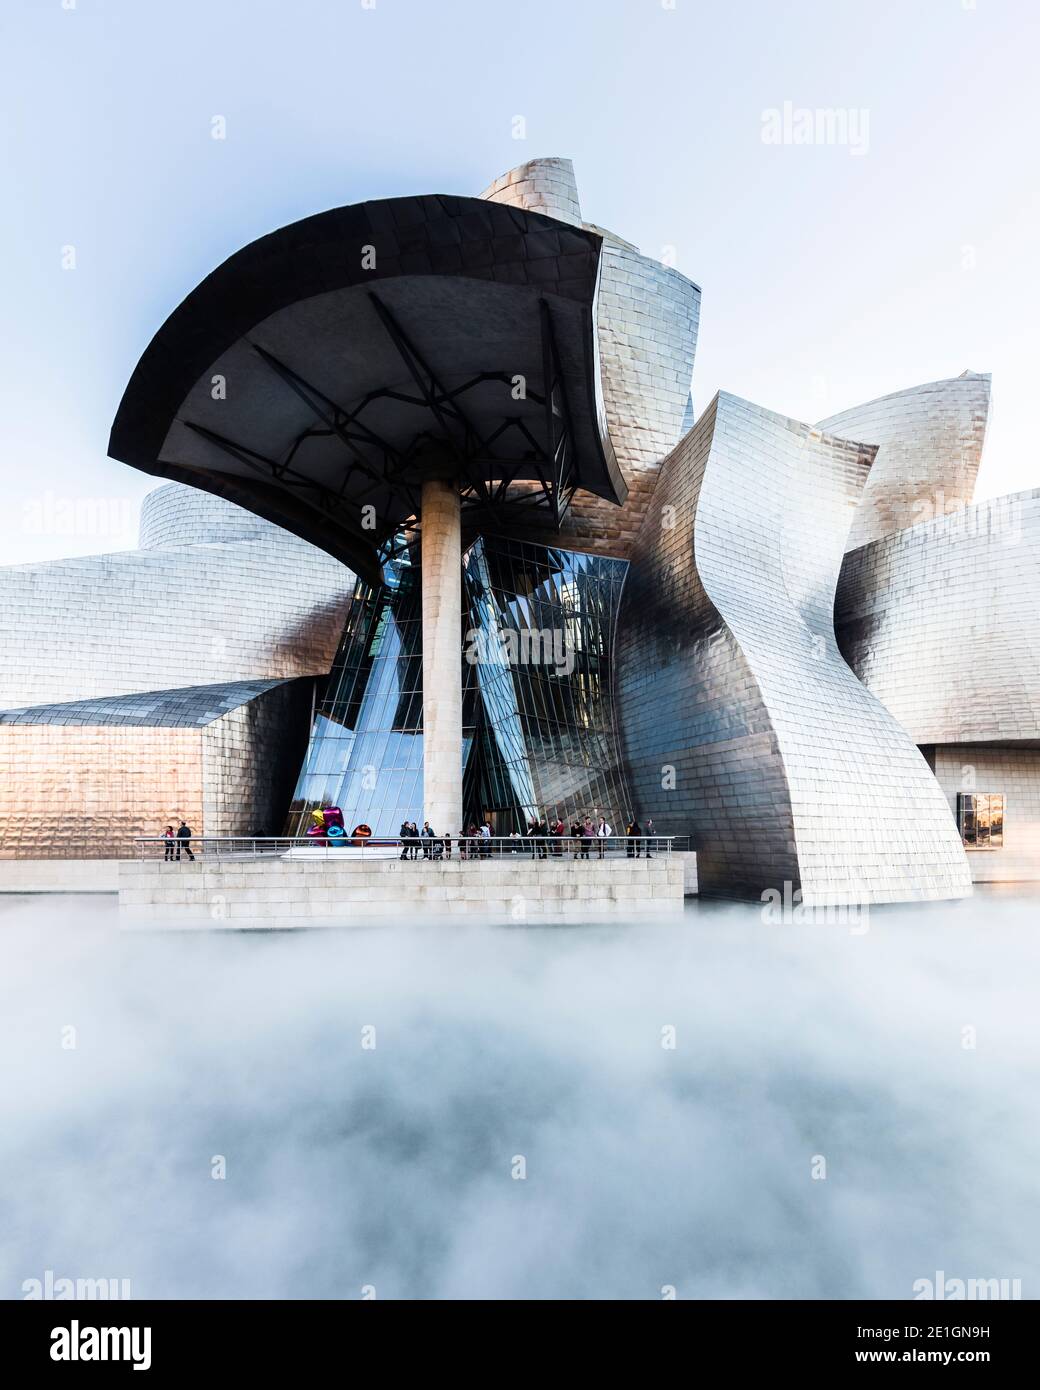 Exterior view of the curved titanium and glass facade of The Guggenheim Museum in Bilbao, Basque Country, Spain. Stock Photo